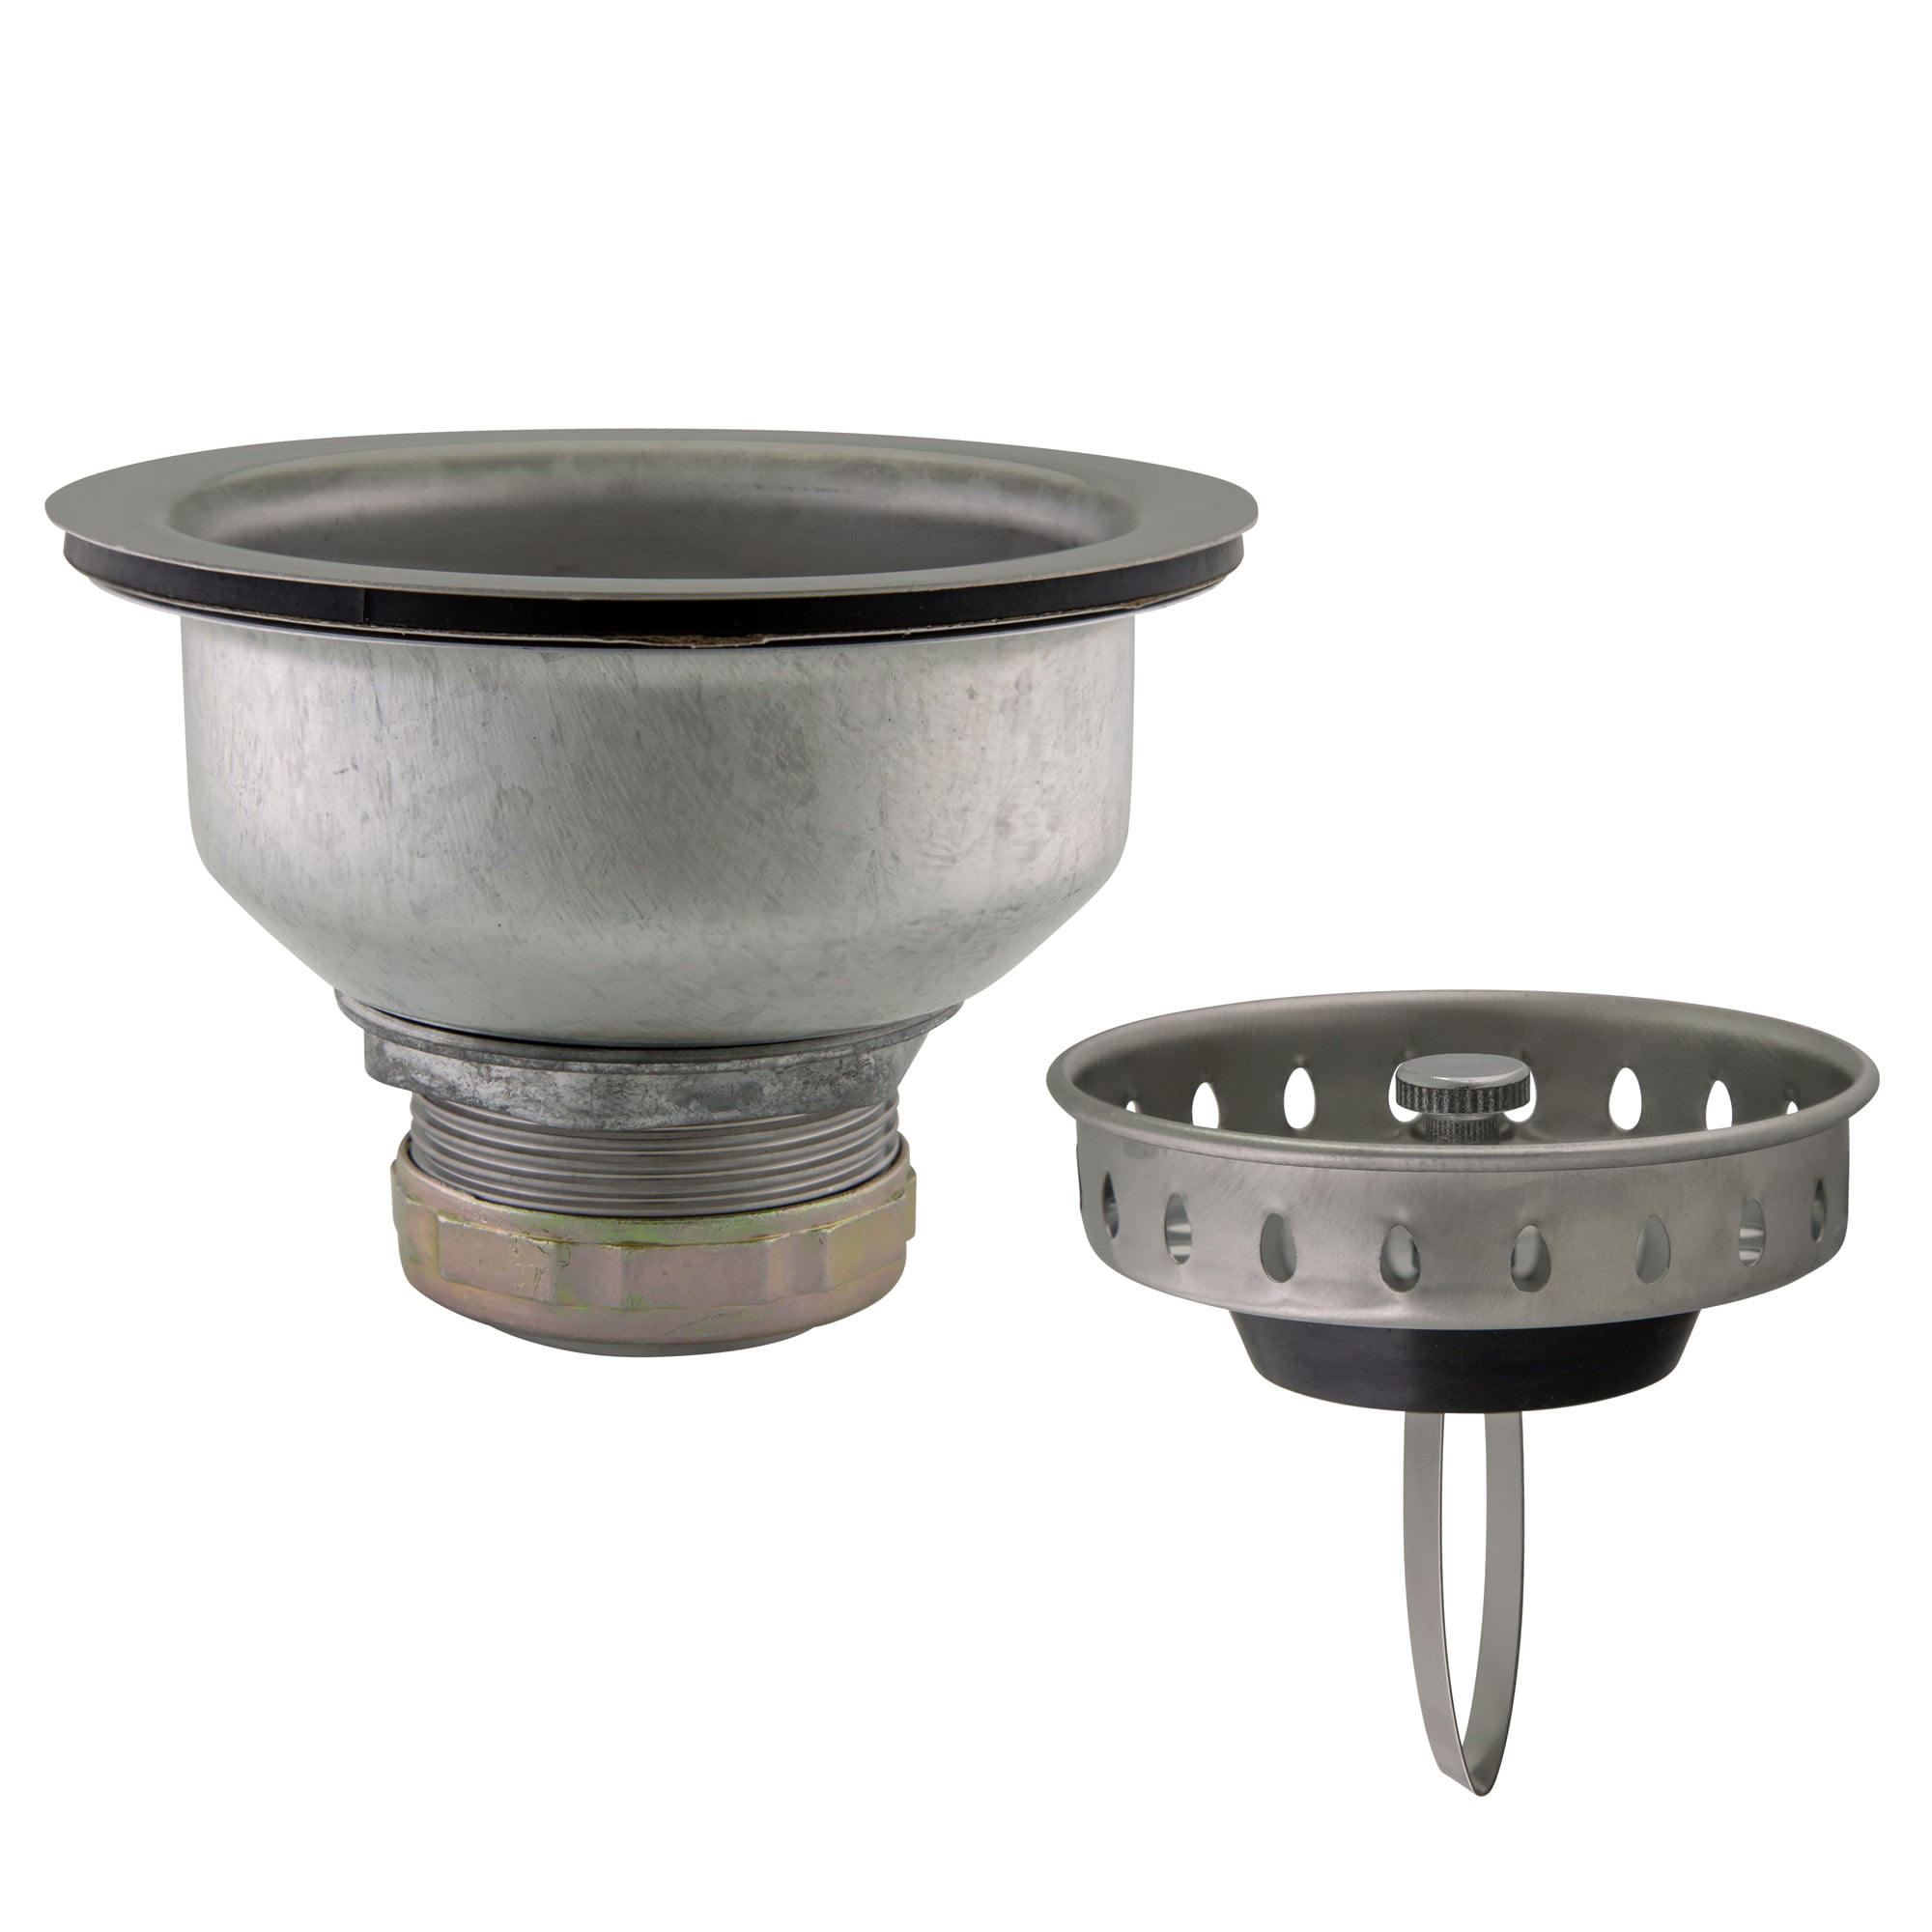 Details about   2PCS Stainless Steel Kitchen Strainer Sink Drain Raniaco sink Stoppers Silver 